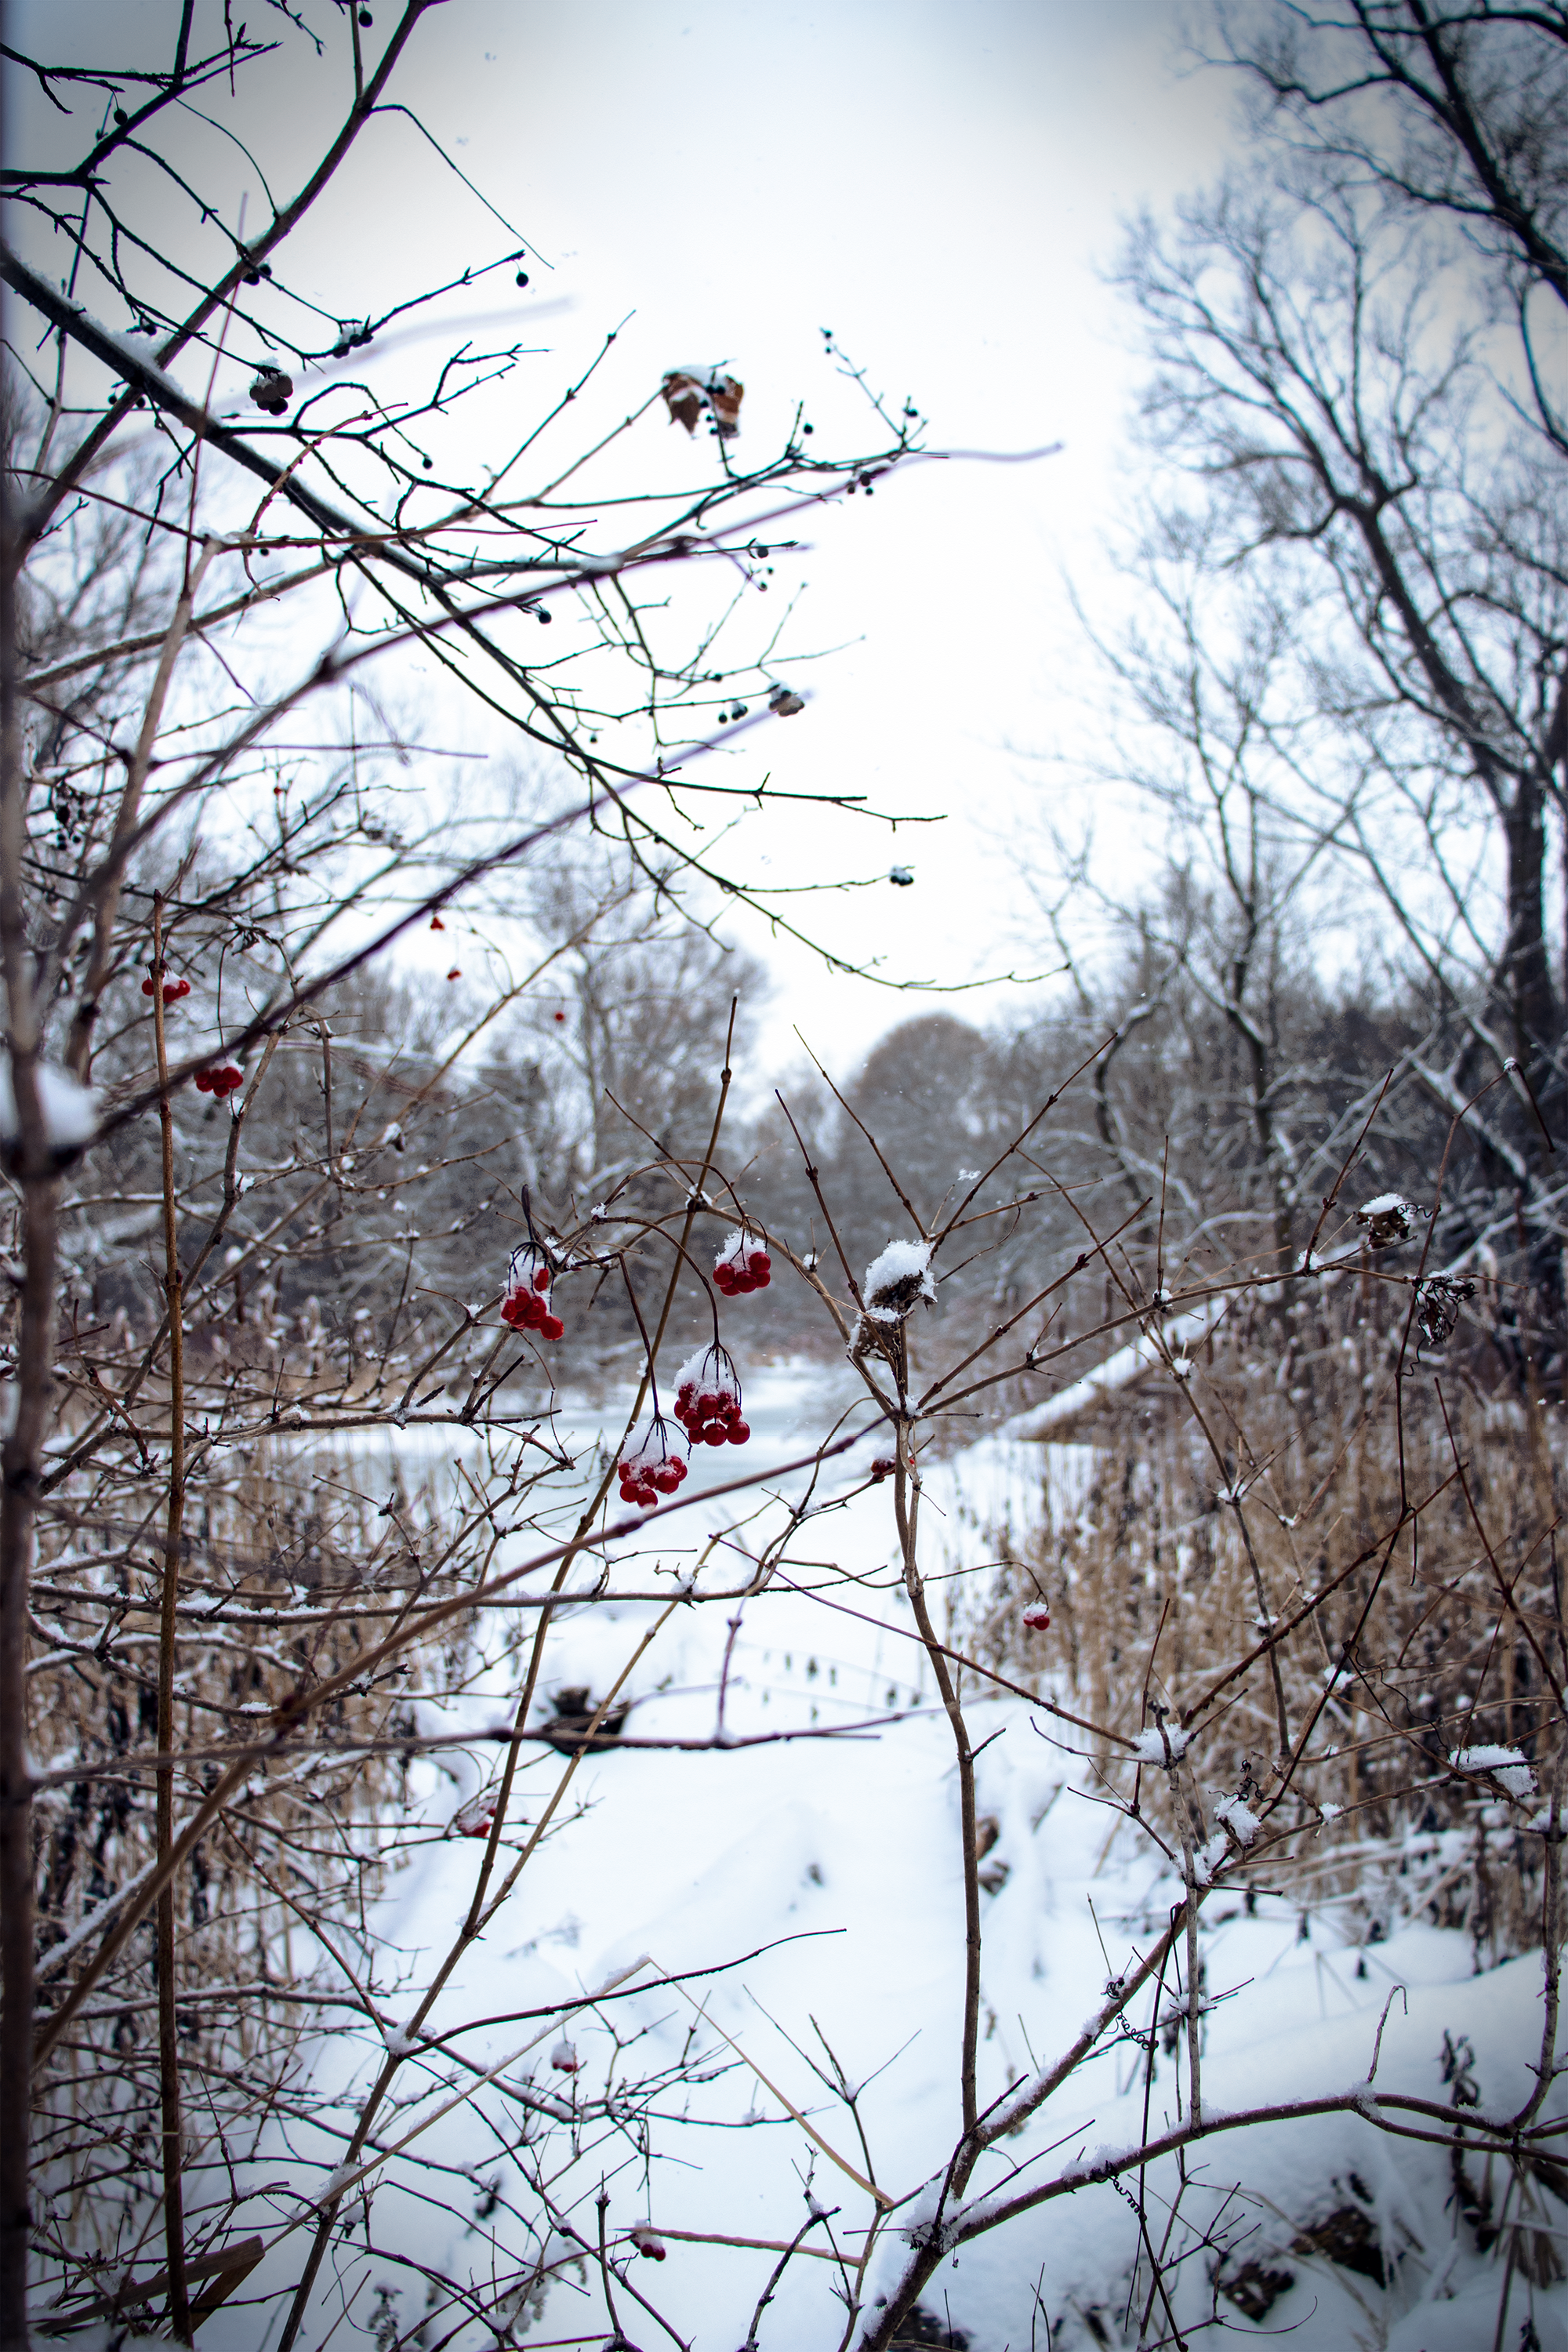 General 2000x3000 winter red berries berries trees plants portrait display snow snow covered